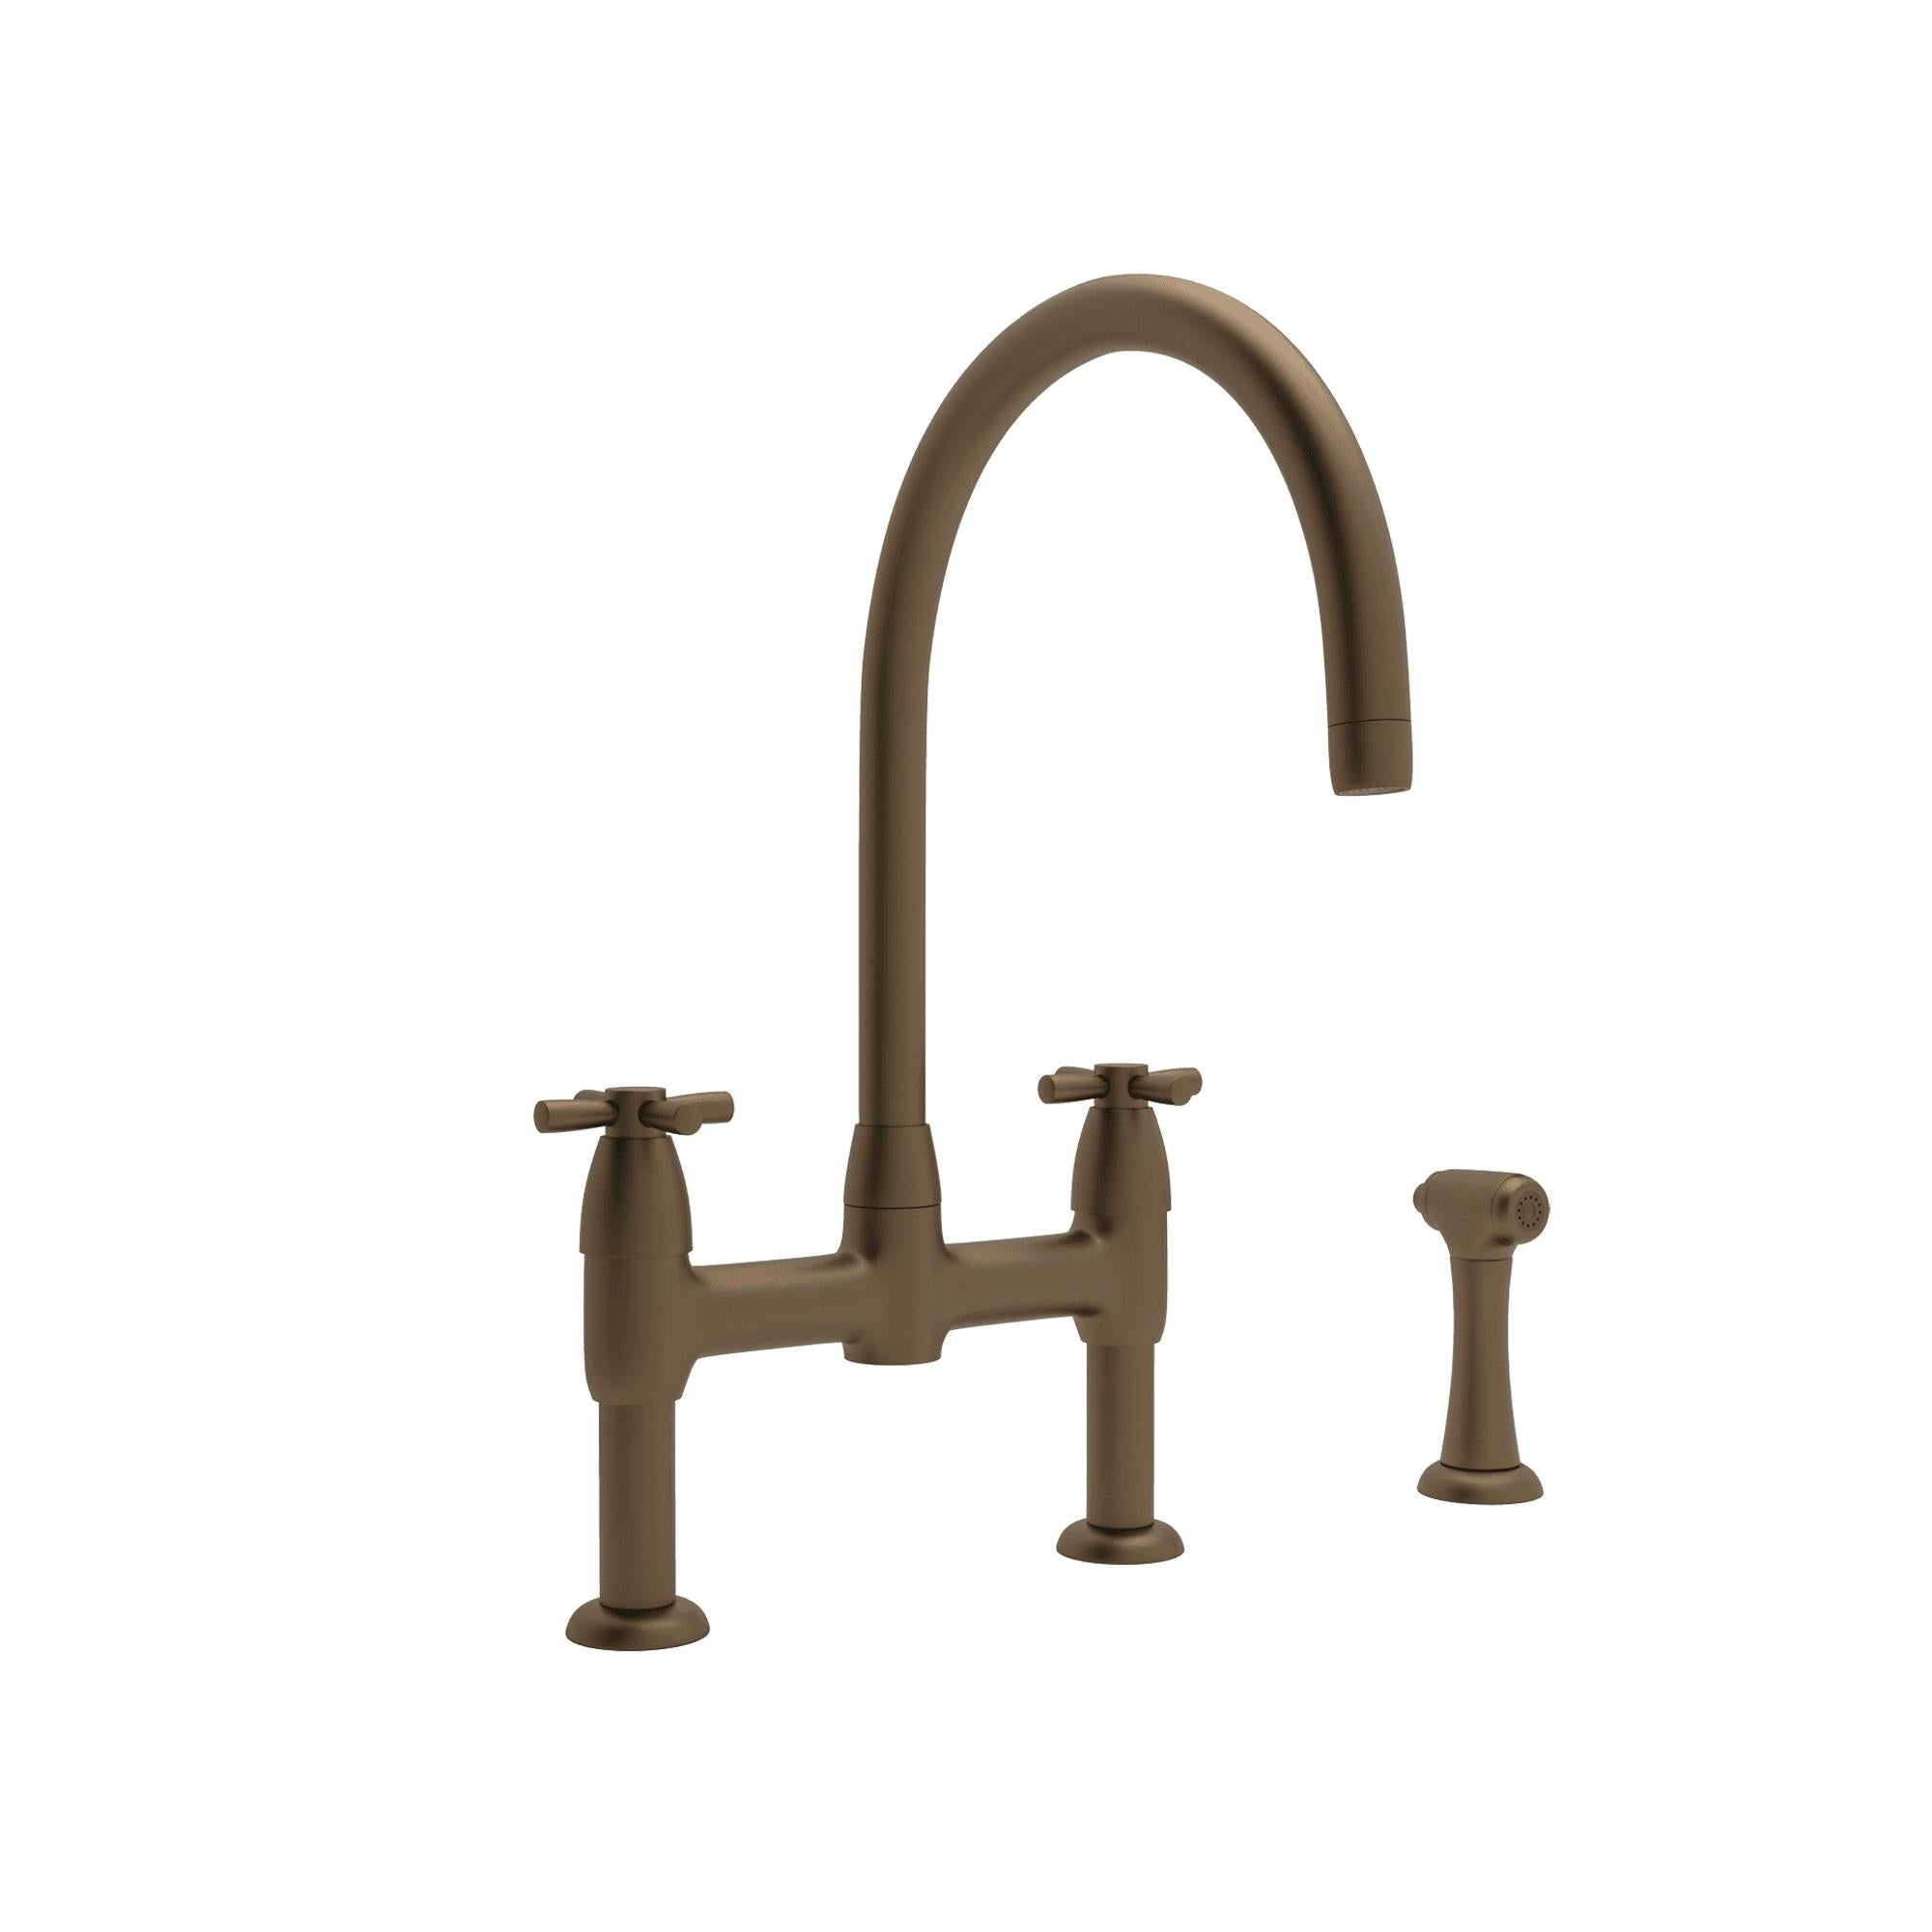 Perrin & Rowe U.4272 Holborn Bridge Kitchen Faucet with C-Spout and Side Spray